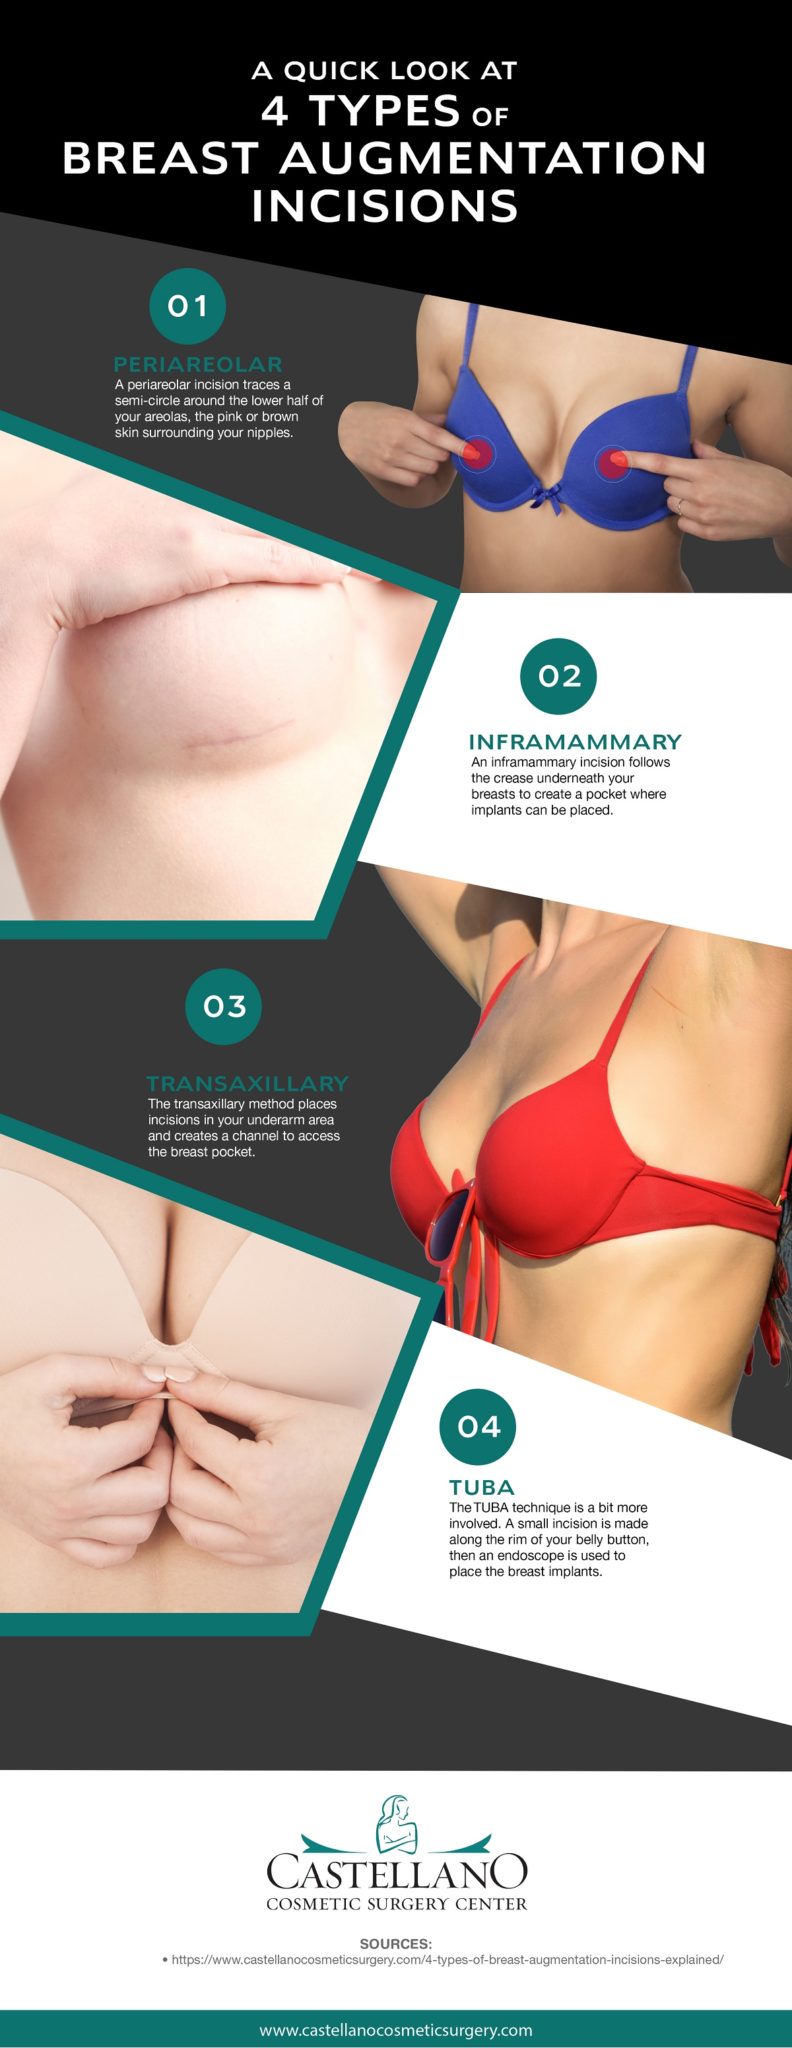 A Quick Look at 4 Types of Breast Augmentation Incisions [Infographic] img 1